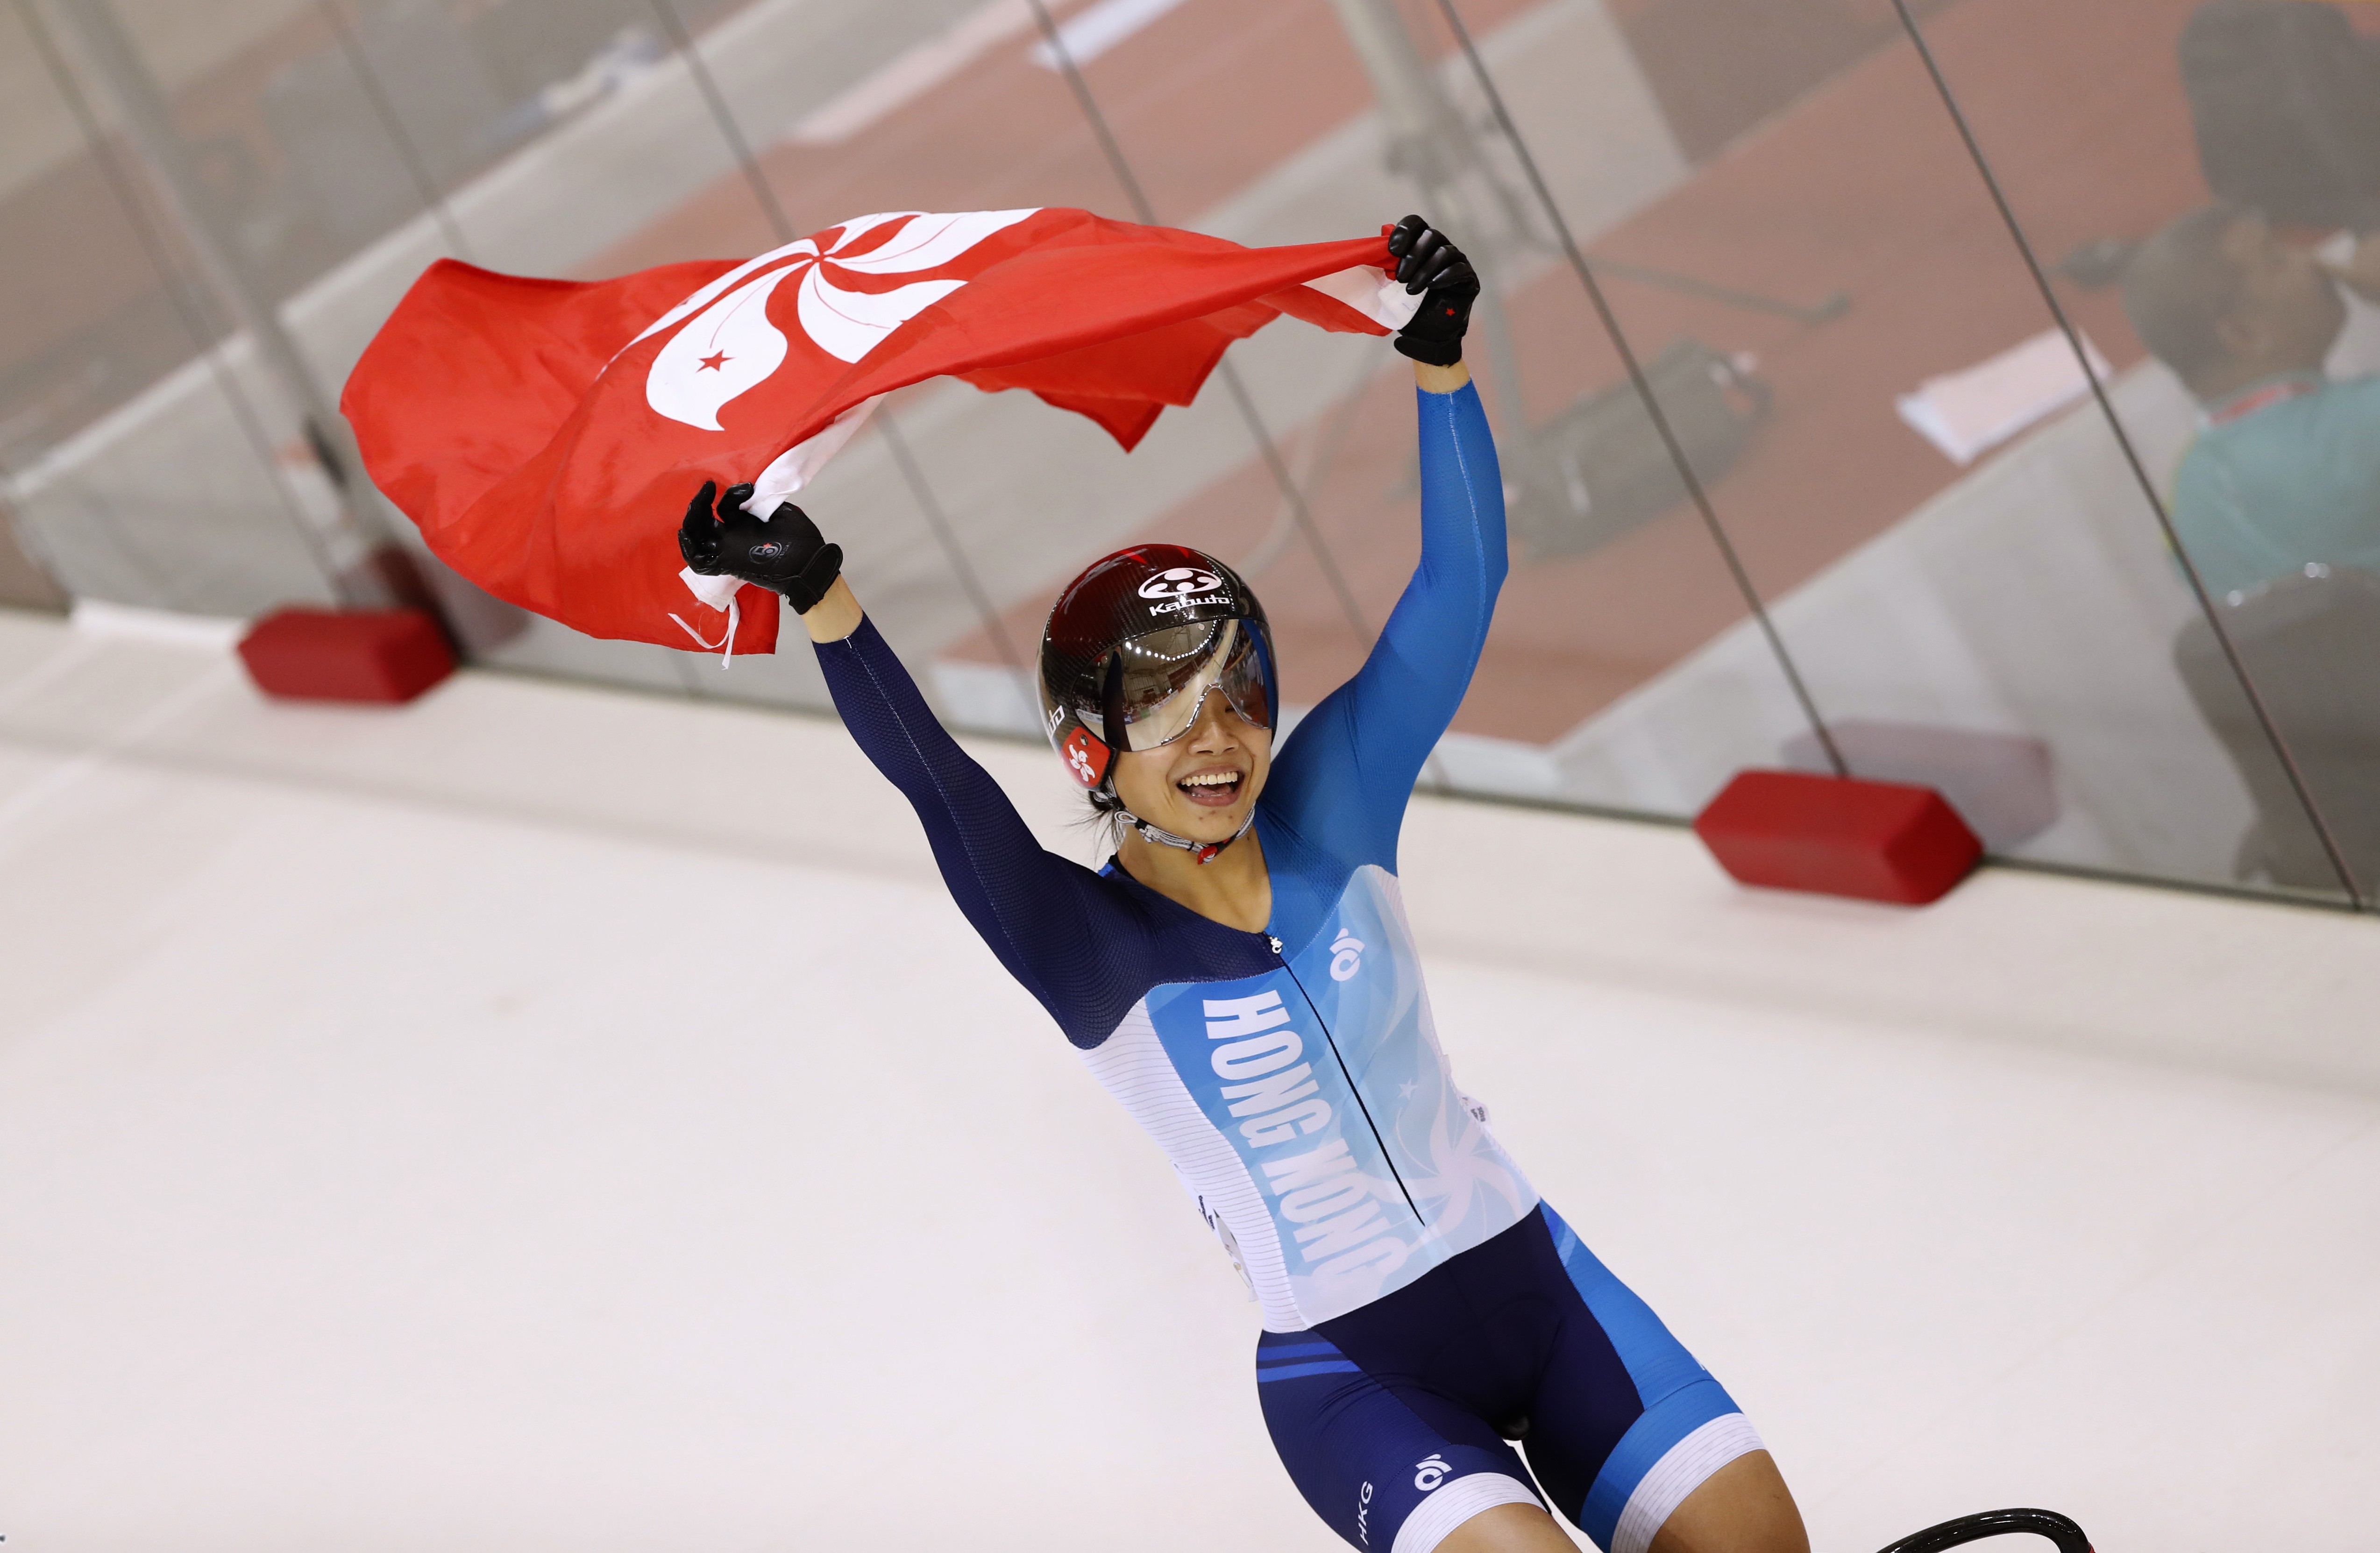 Sarah Lee Wai-sze is a shoo-in for best Hong Kong athlete of 2018 award –  sorry Ng On-yee | South China Morning Post